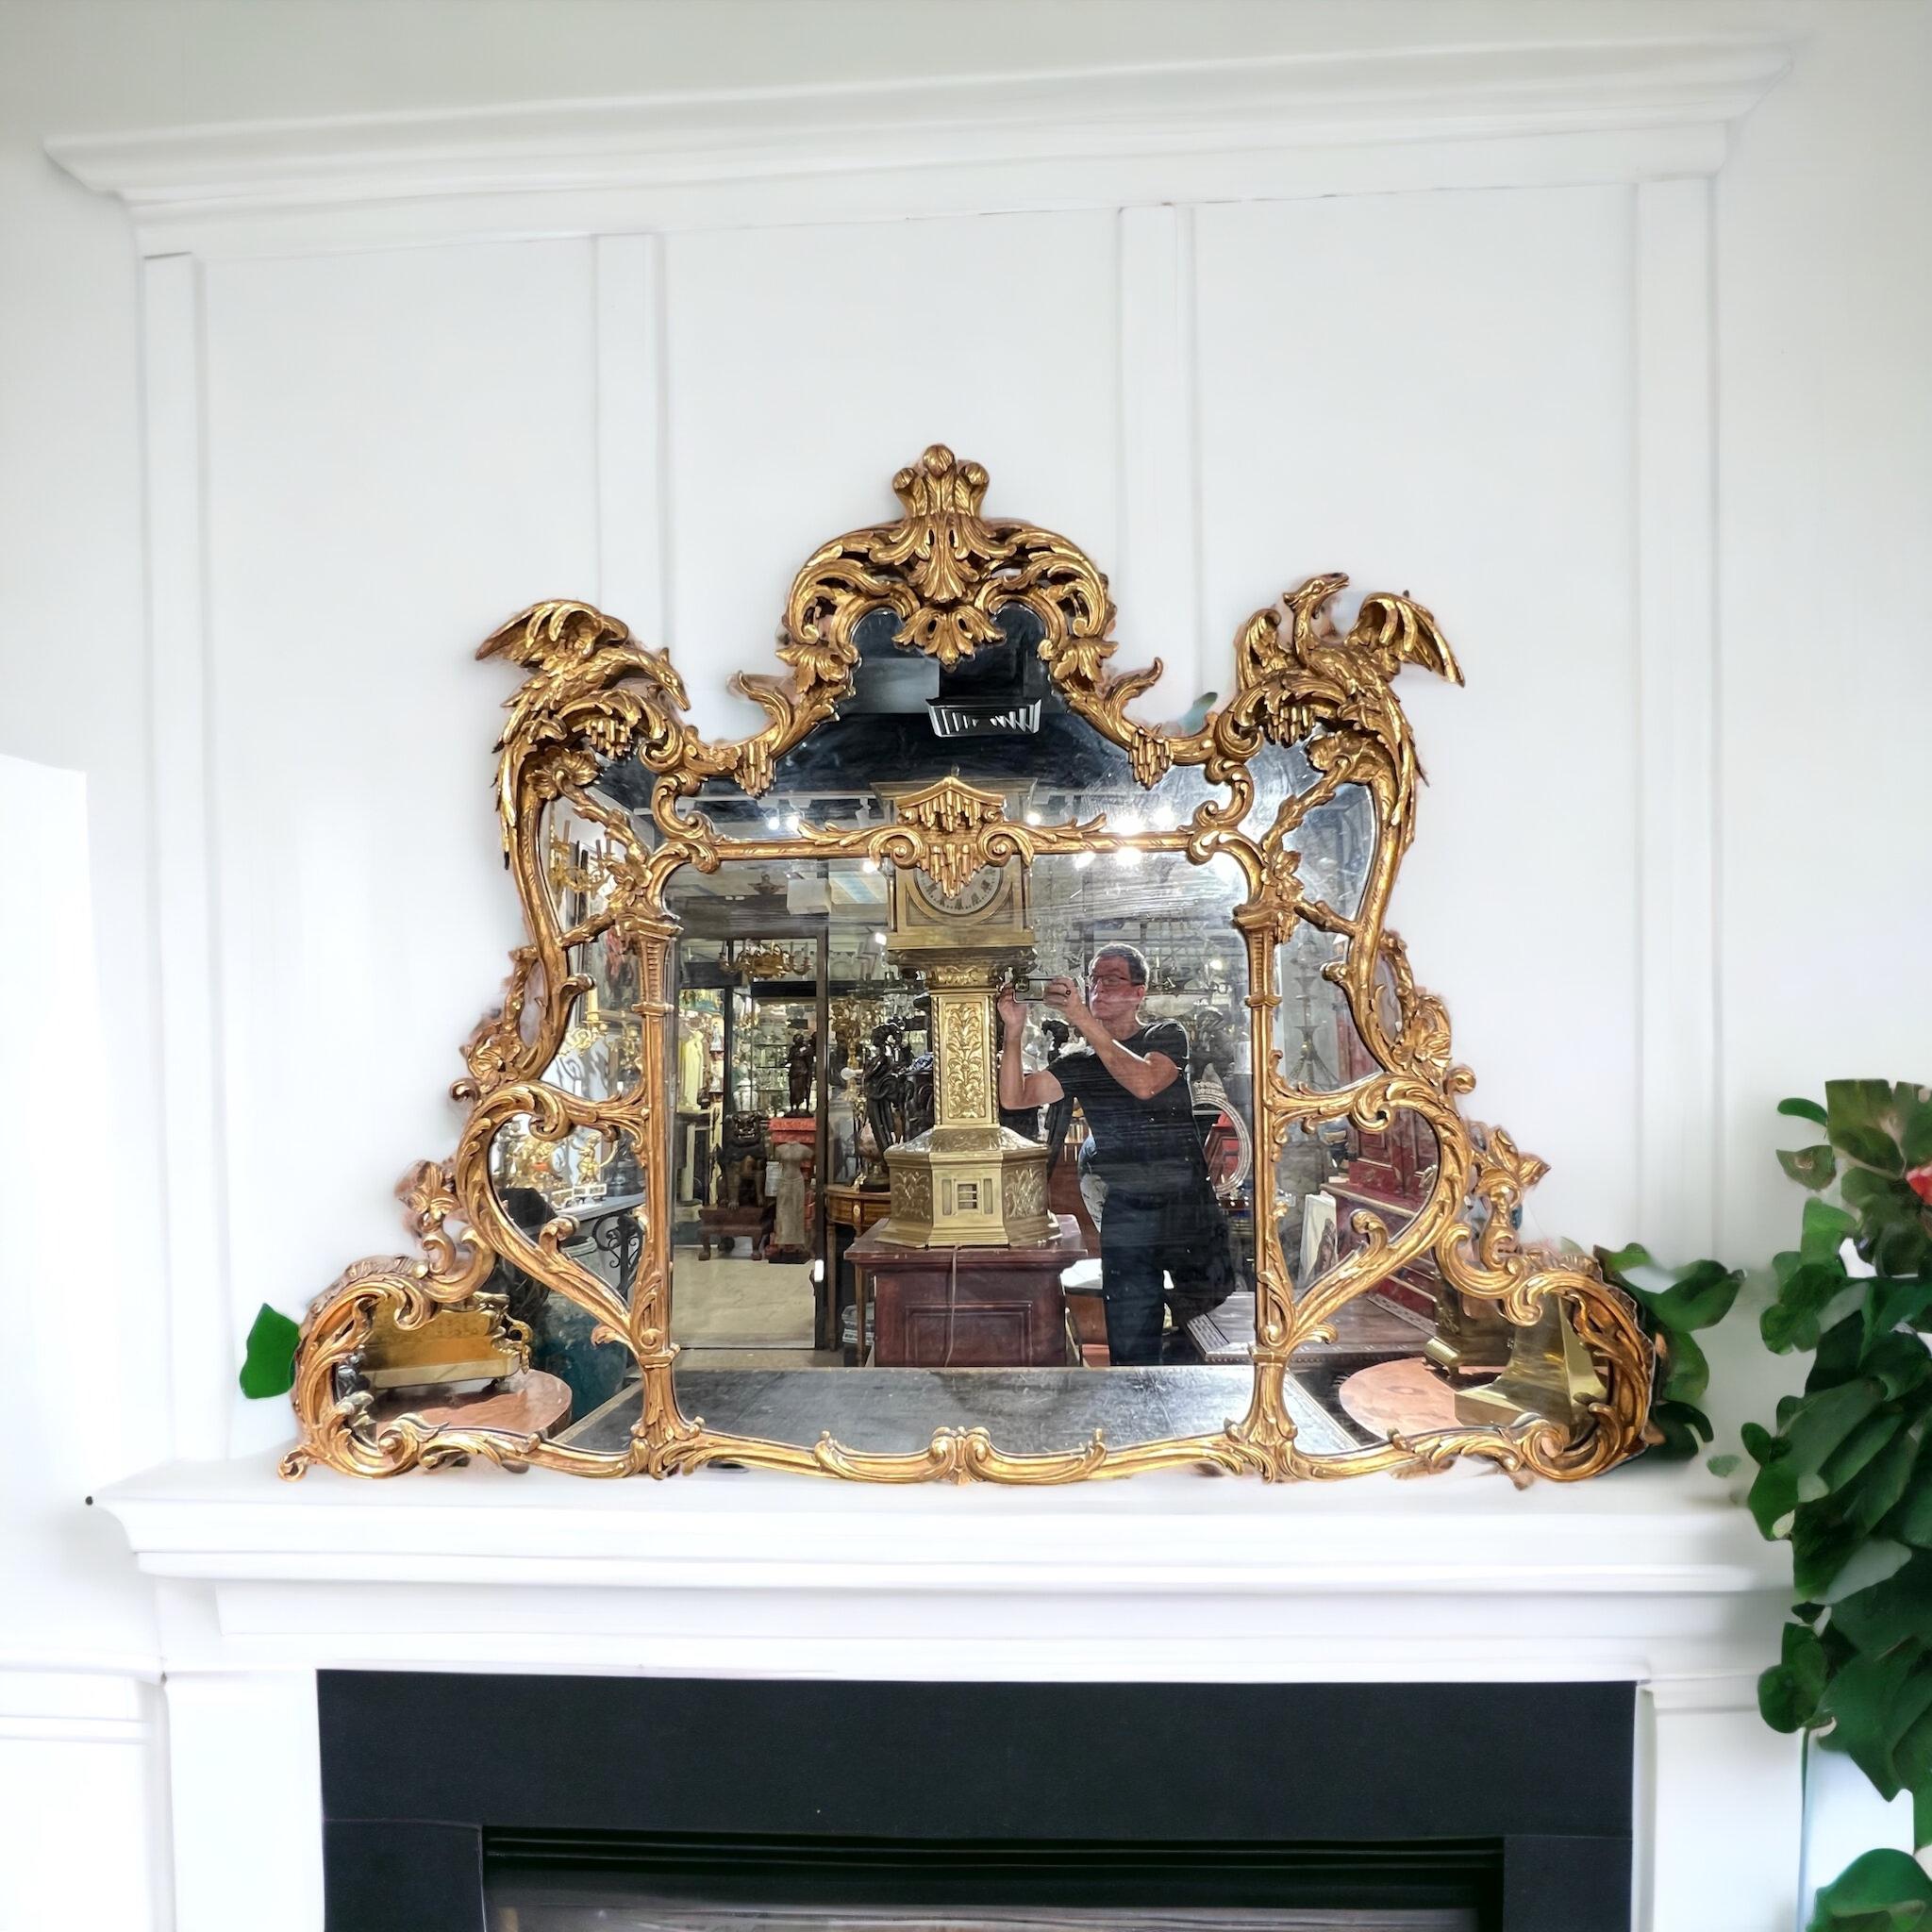 Magnificent antique (19th century) hand-carved giltwood mirror in the Chinoiserie Chippendale style, with ho ho birds, pagoda roof, scrolling s and c-scrolls and feather plume motifs.  Excellent condition.  